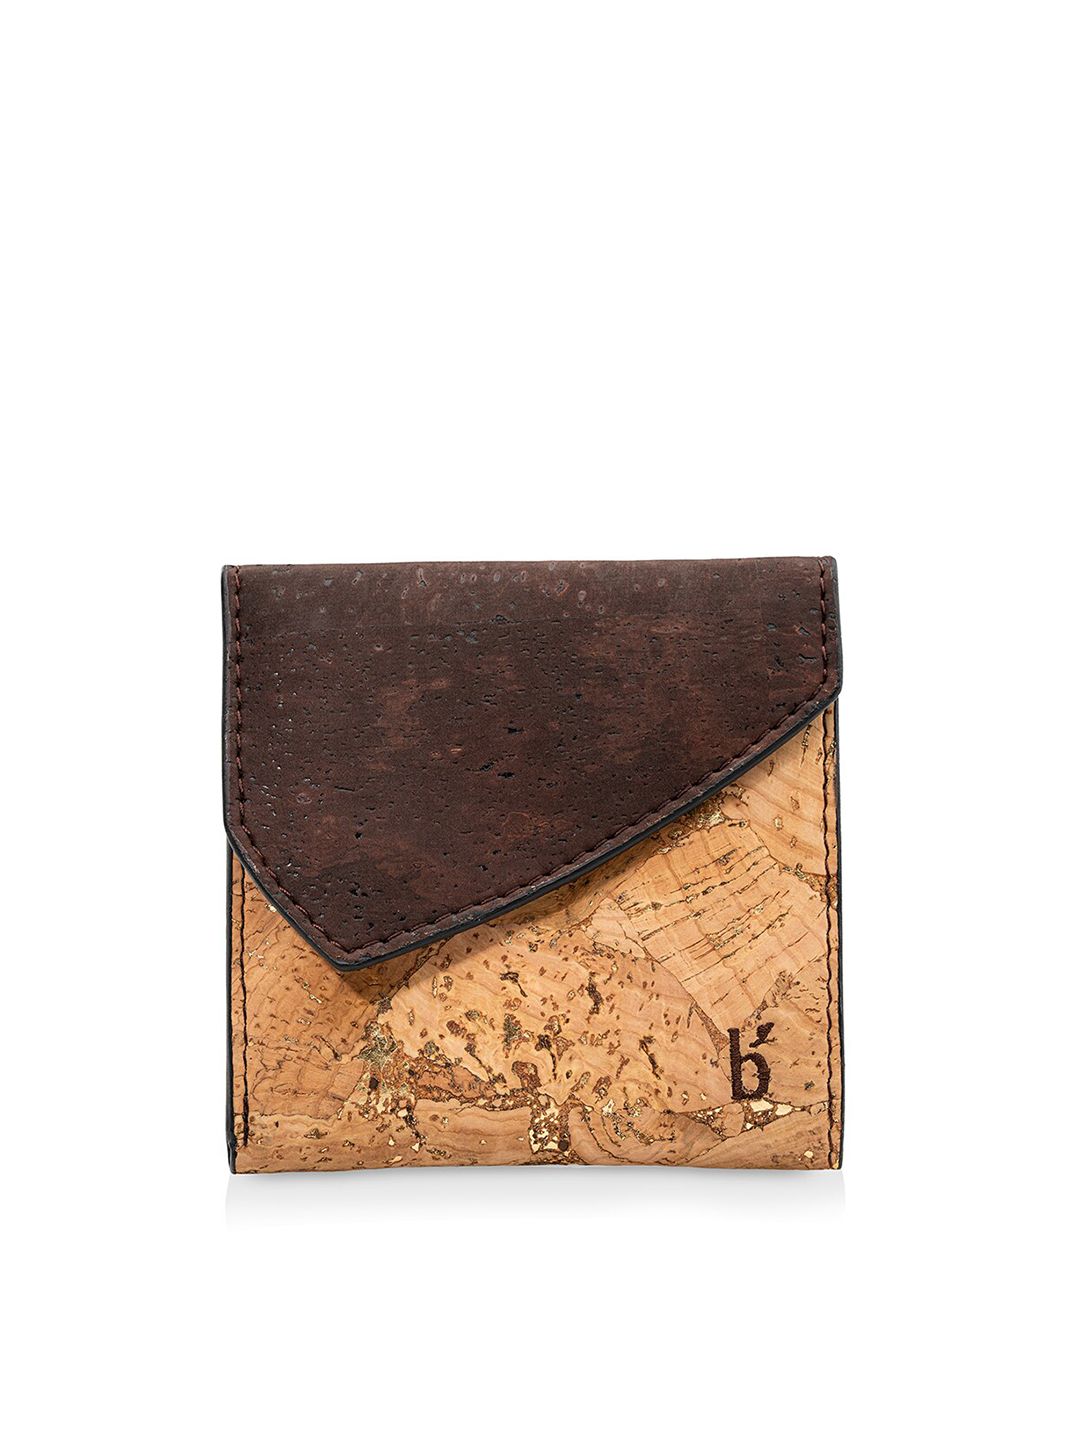 Beej Unisex Gold-Toned & Brown Textured Three Fold Wallet Price in India